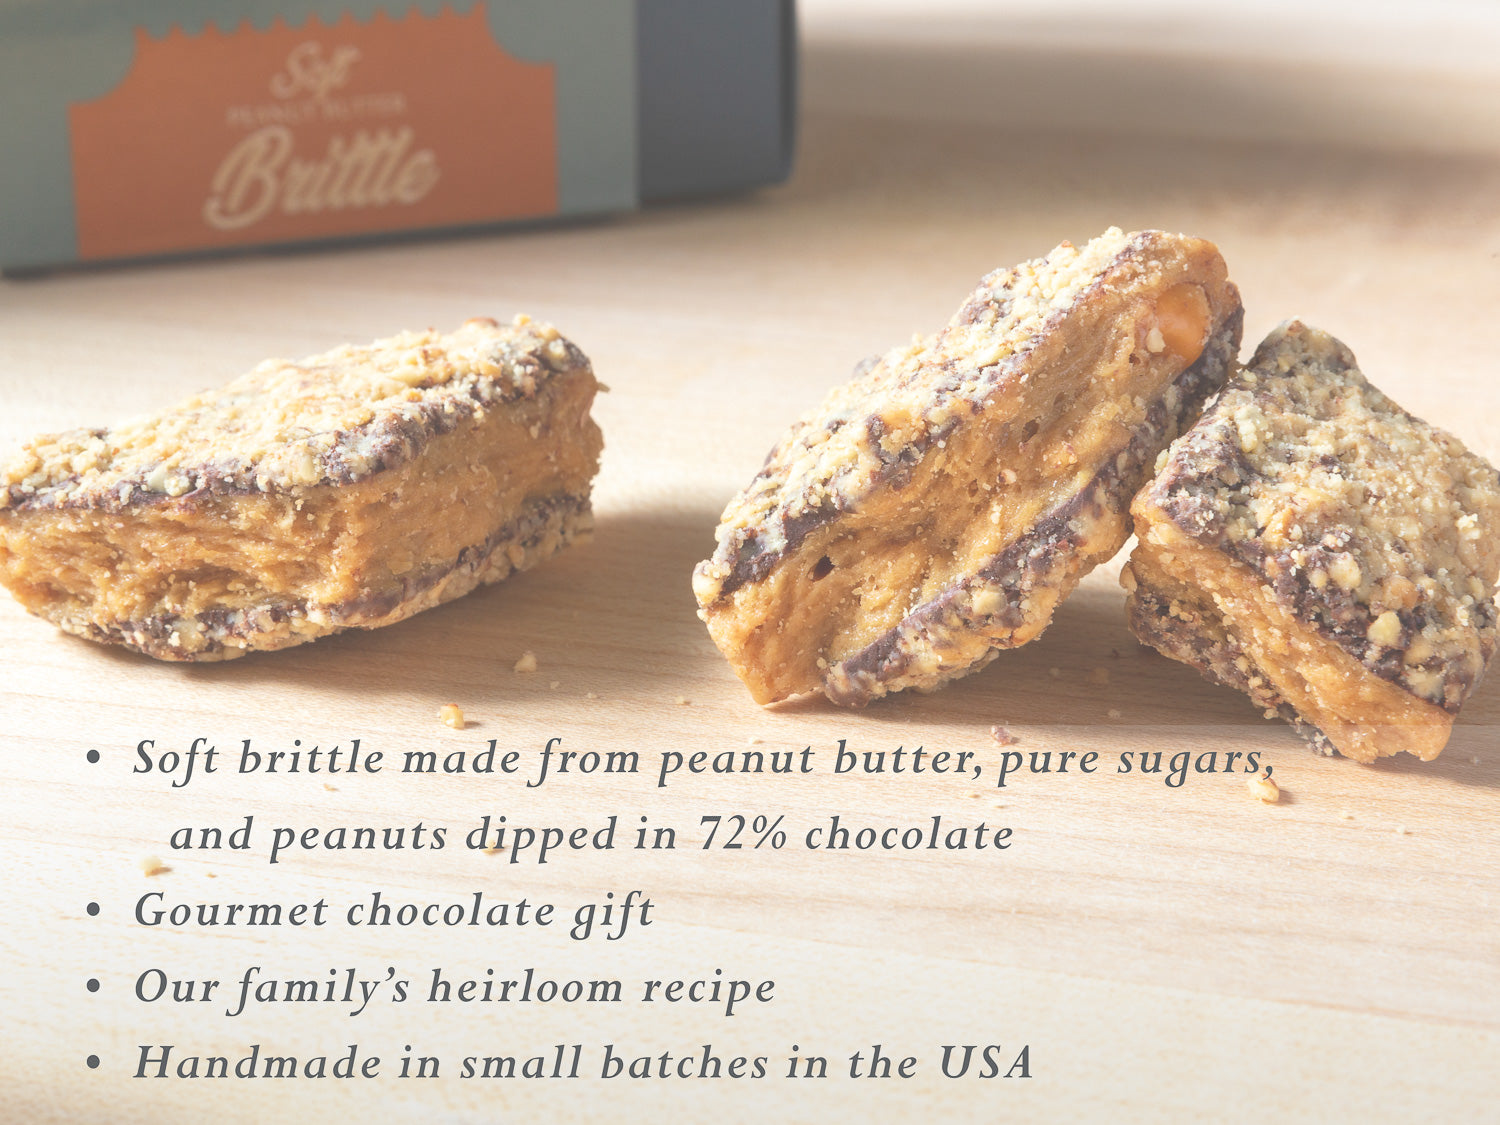 the features of soft peanut butter brittle dipped in dark chocolate